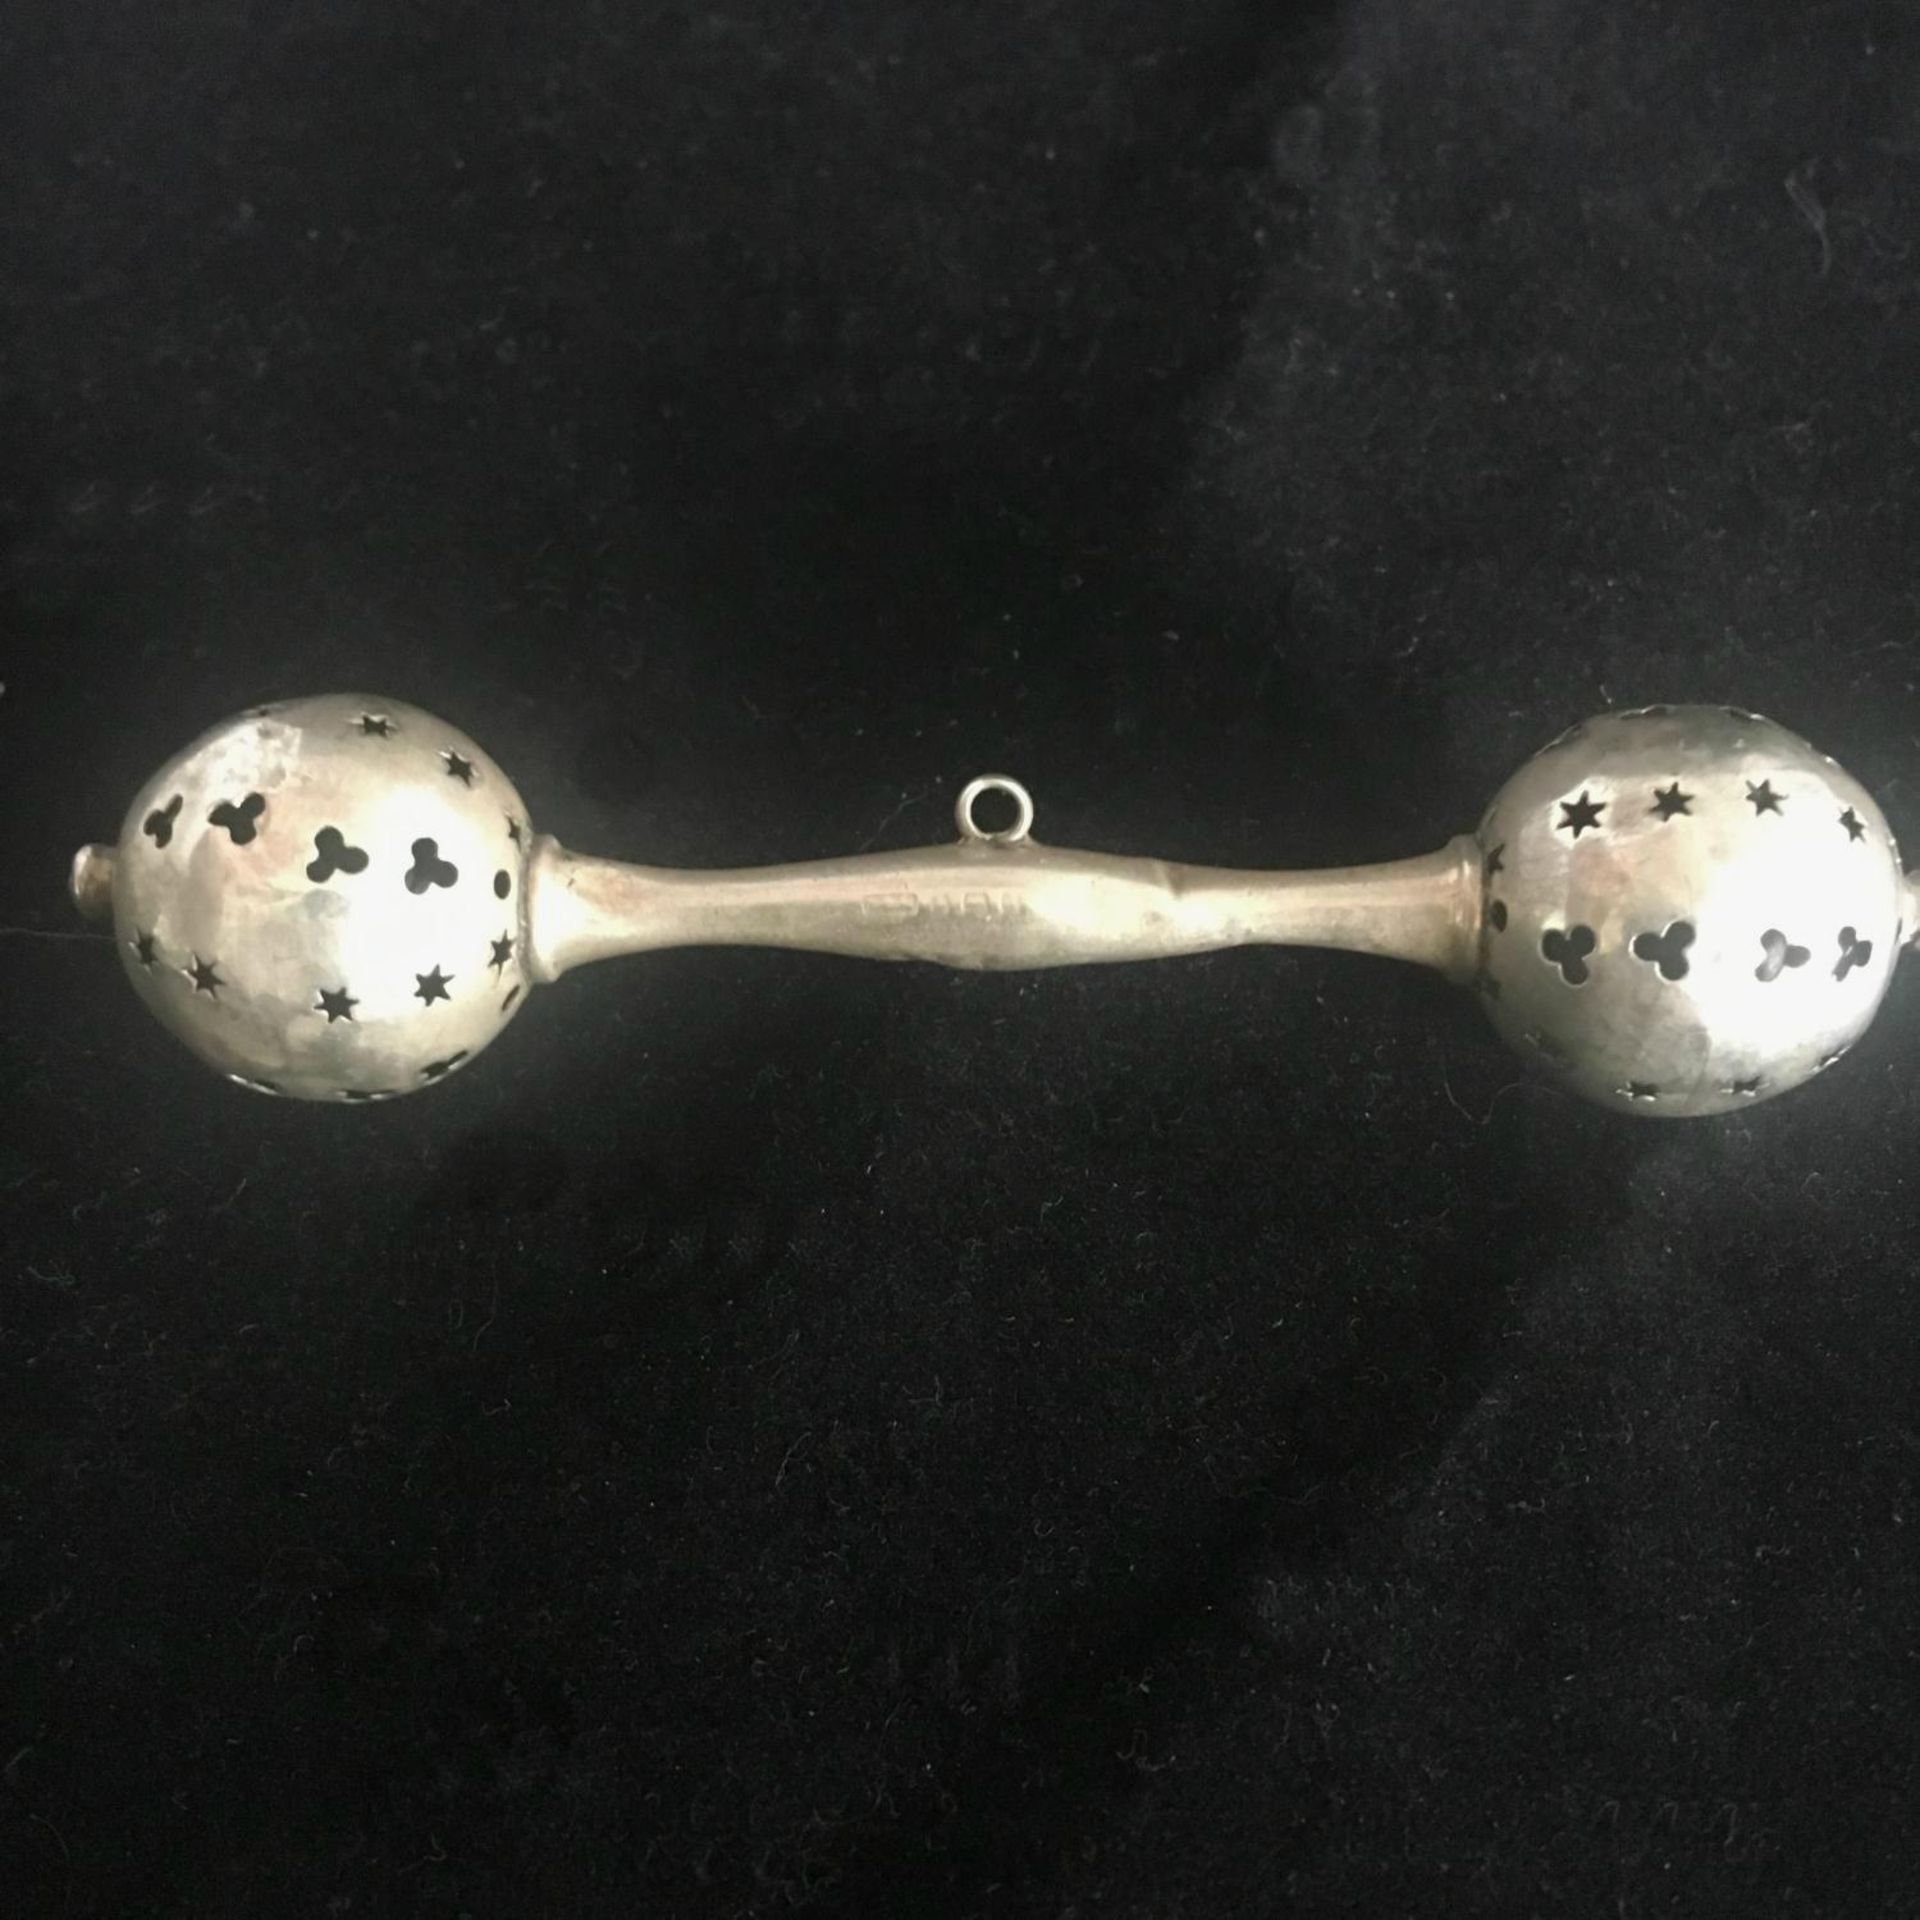 EARLY 20thC HALLMARKED STERLING SILVER RATTLE. With a bell at either end and loop to attach a